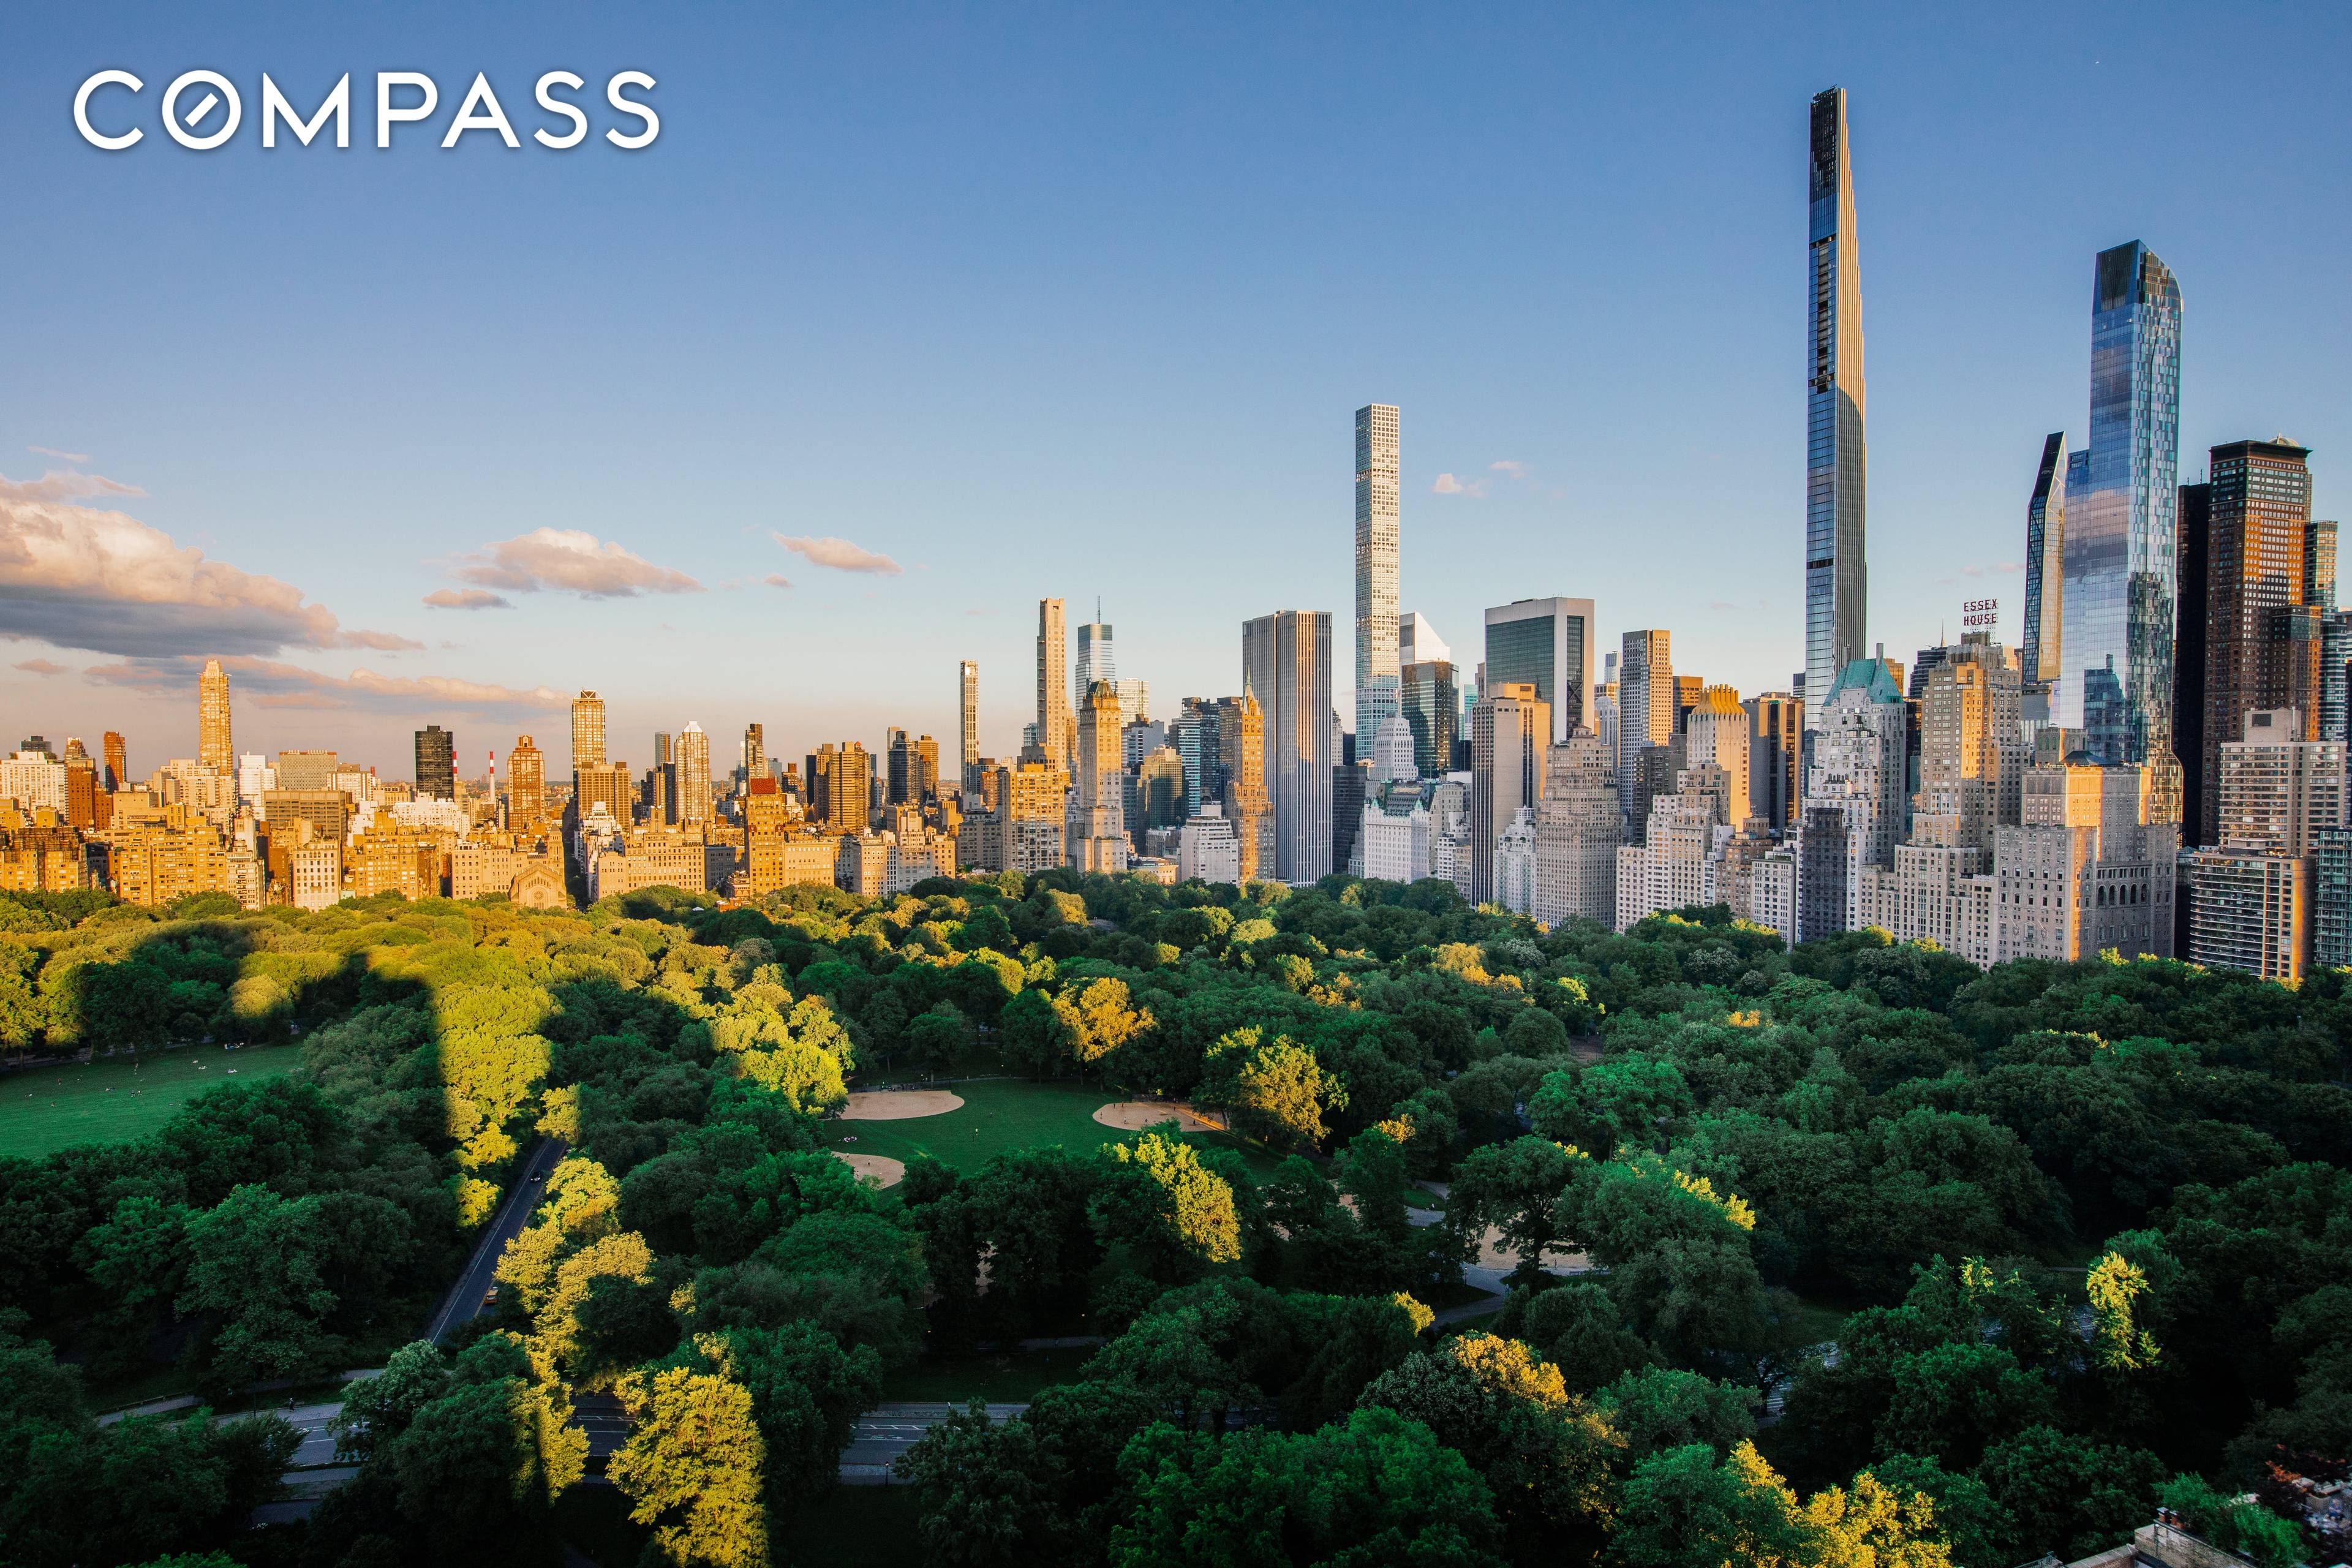 THE CENTRAL PARK VIEW YOU WERE DREAMING OF.